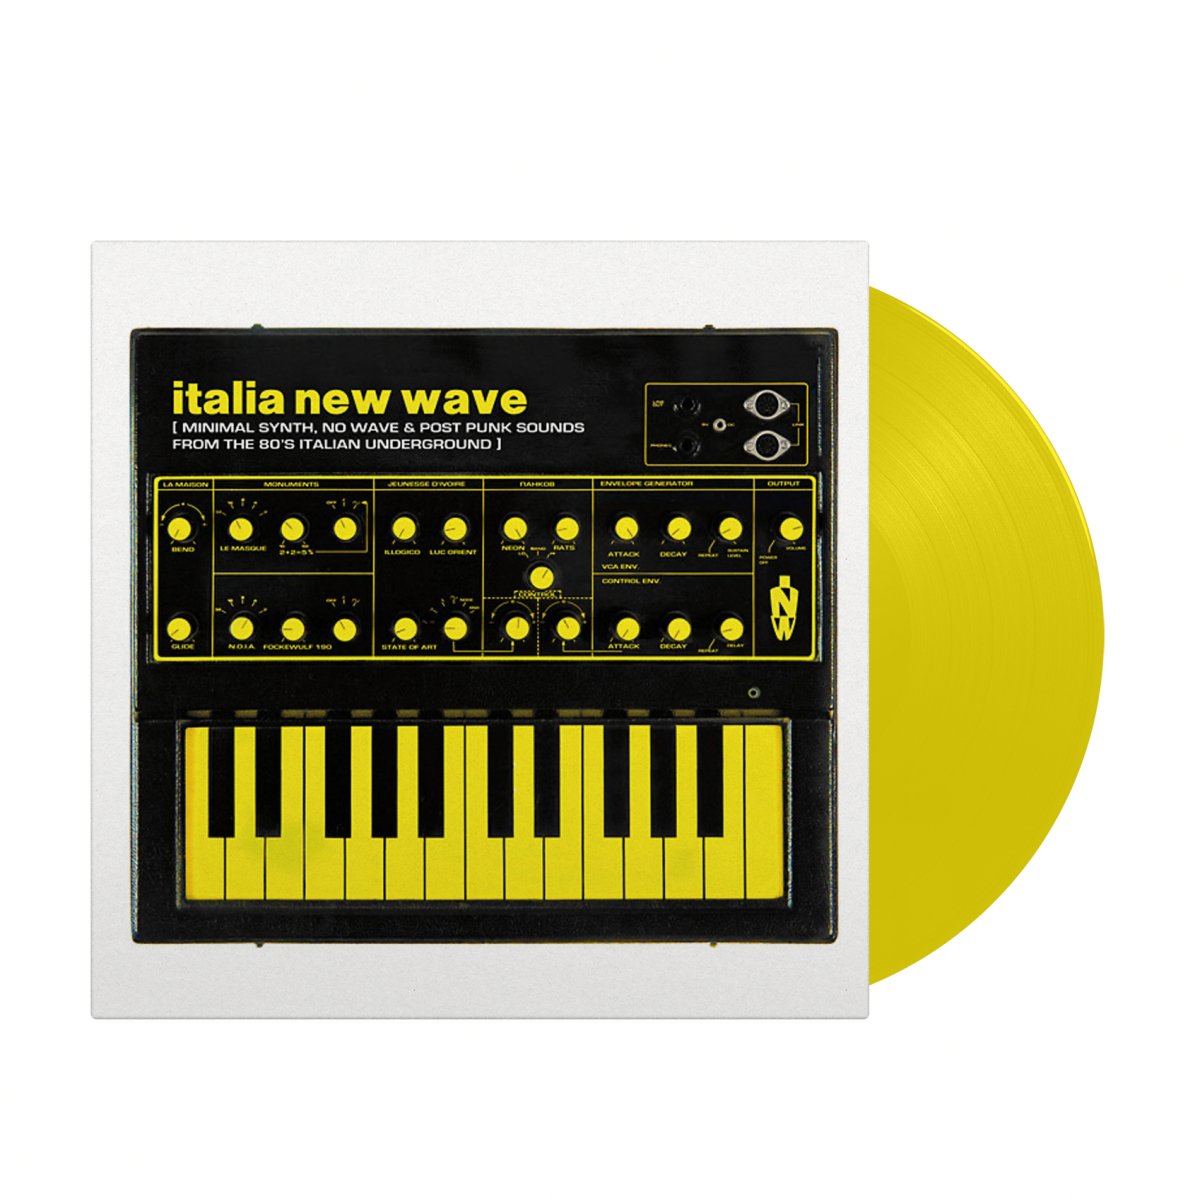 VA - Italia New Wave: Minimal Synth, No Wave, & Post Punk Sounds From The '80s Italian Underground - Inner Ocean Records